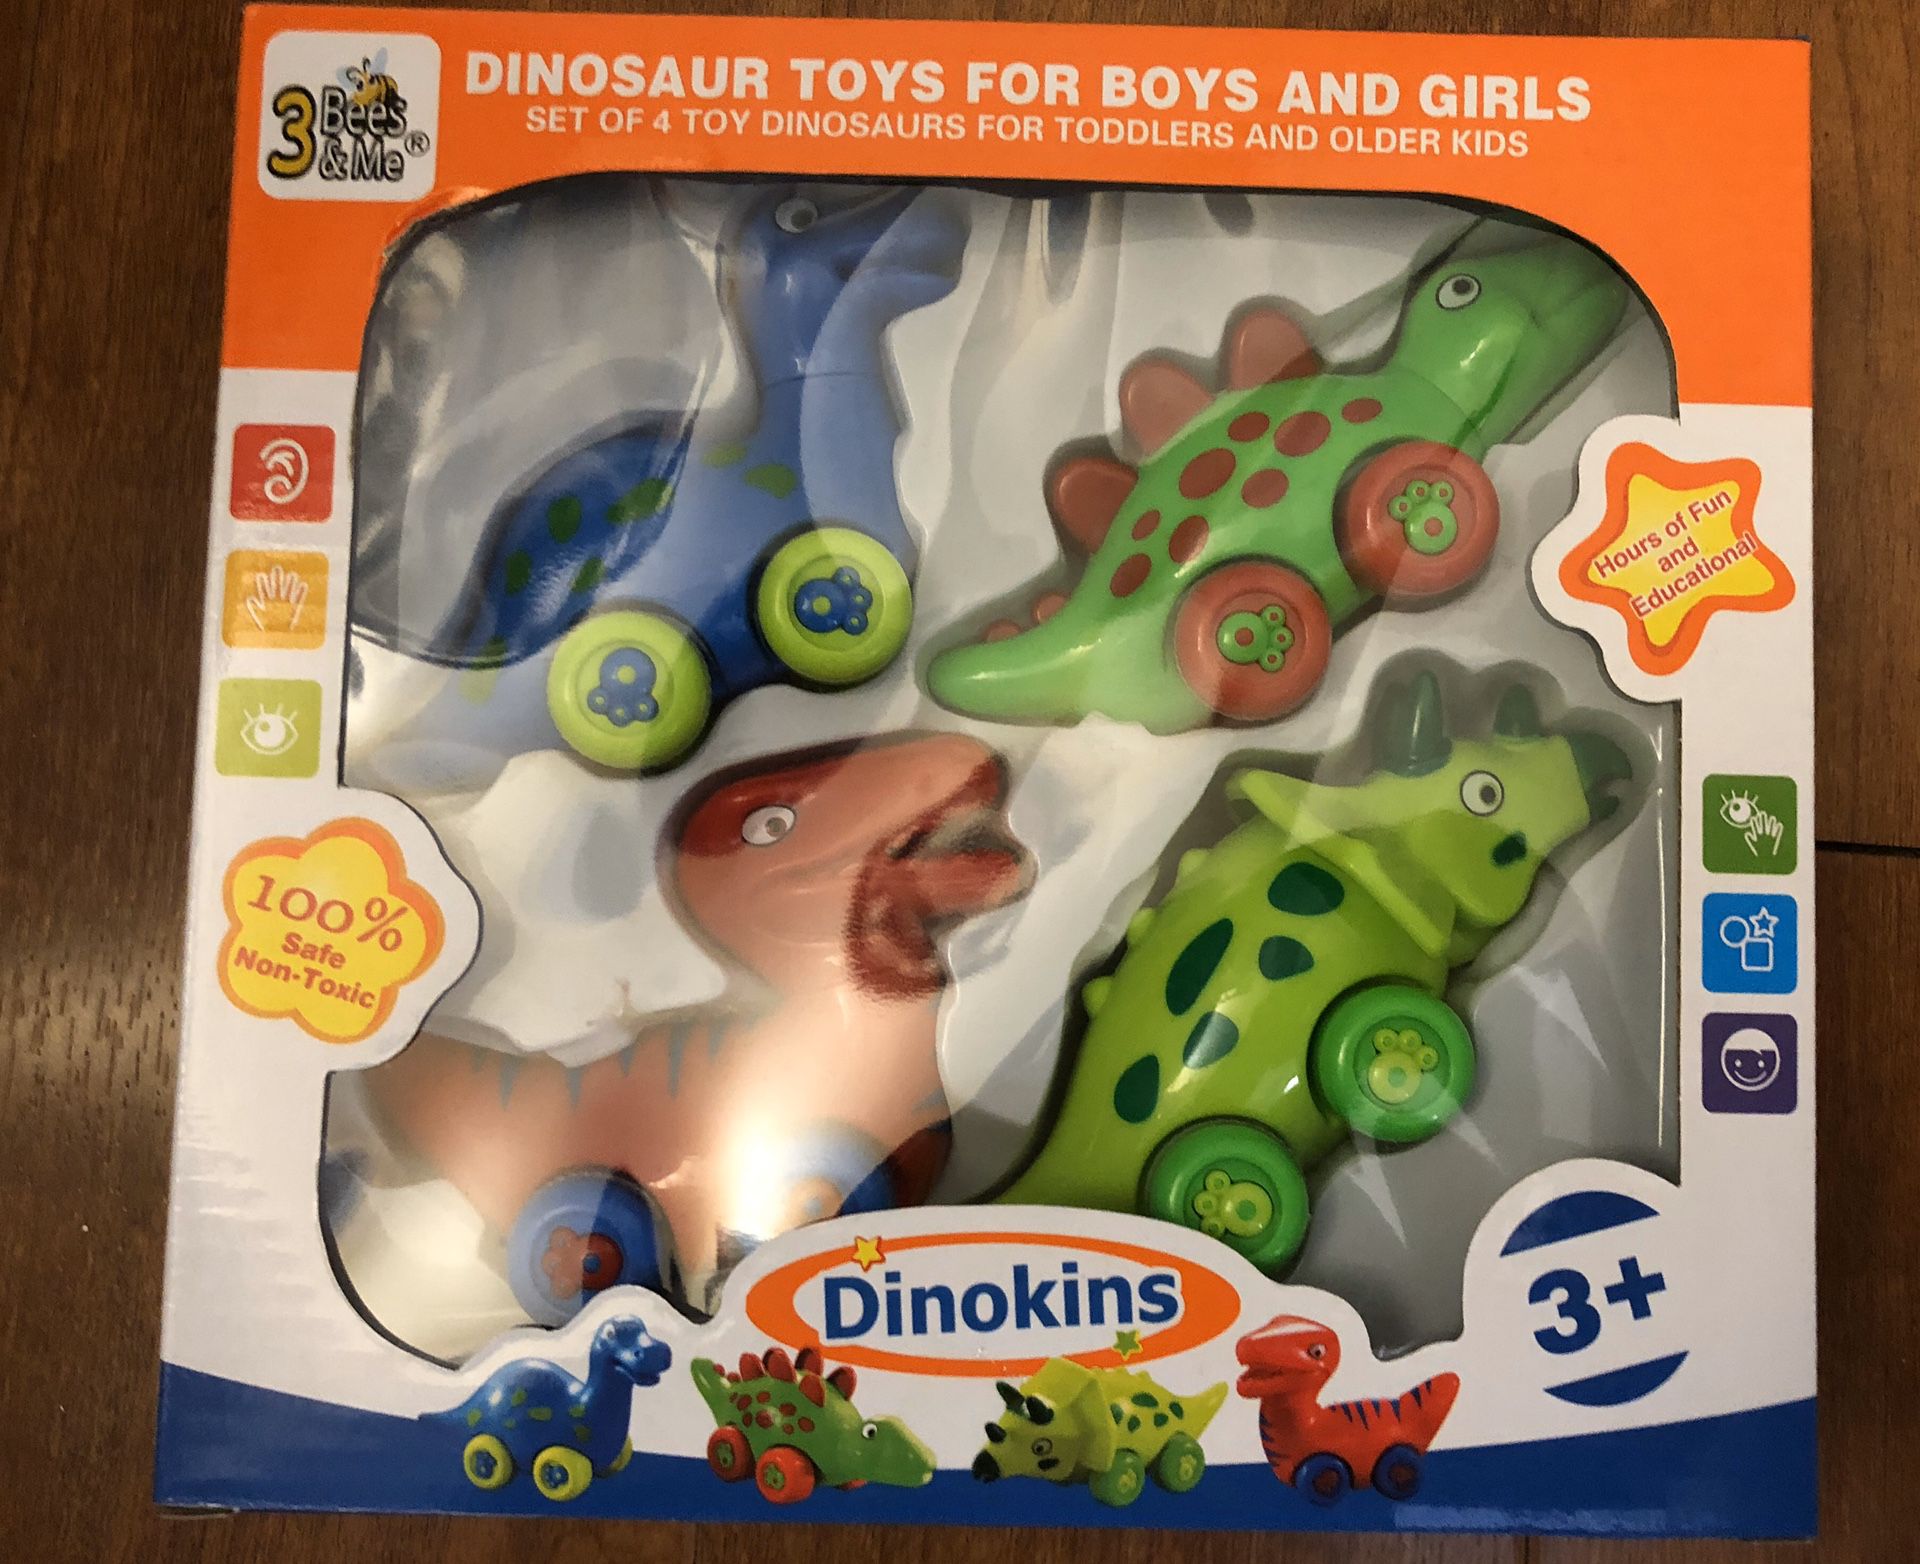 New 3 Bees & Me Dinosaur Toys for Boys and Girls - Set of 4 Toy Dinosaurs for Kids(pick u only)